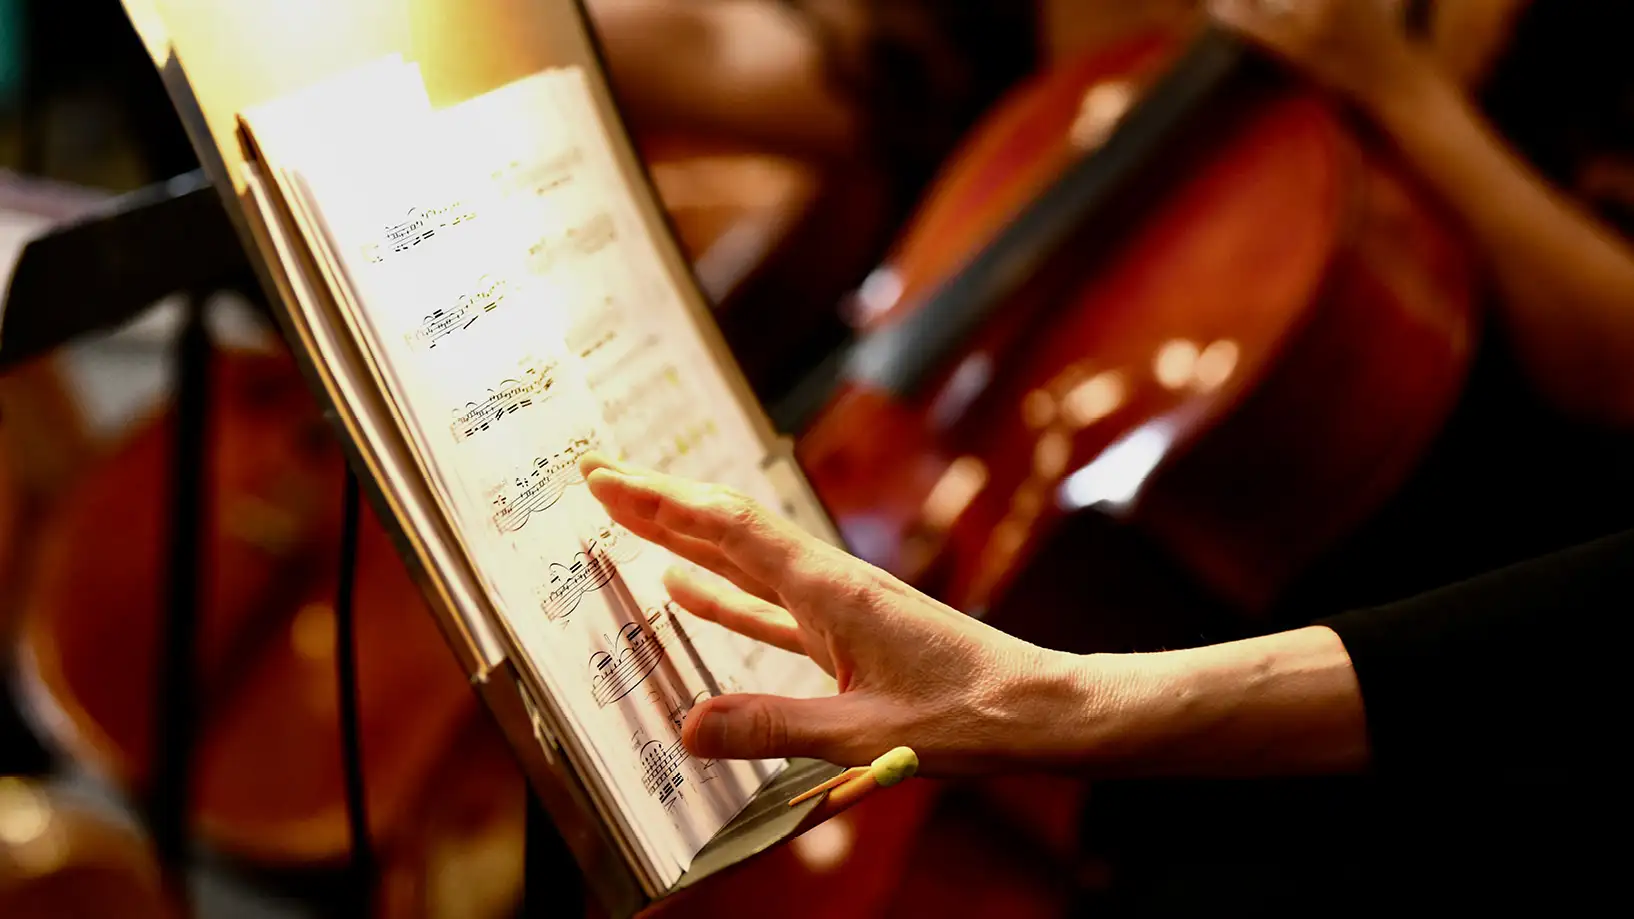 upclose view of sheet music, chello in the background